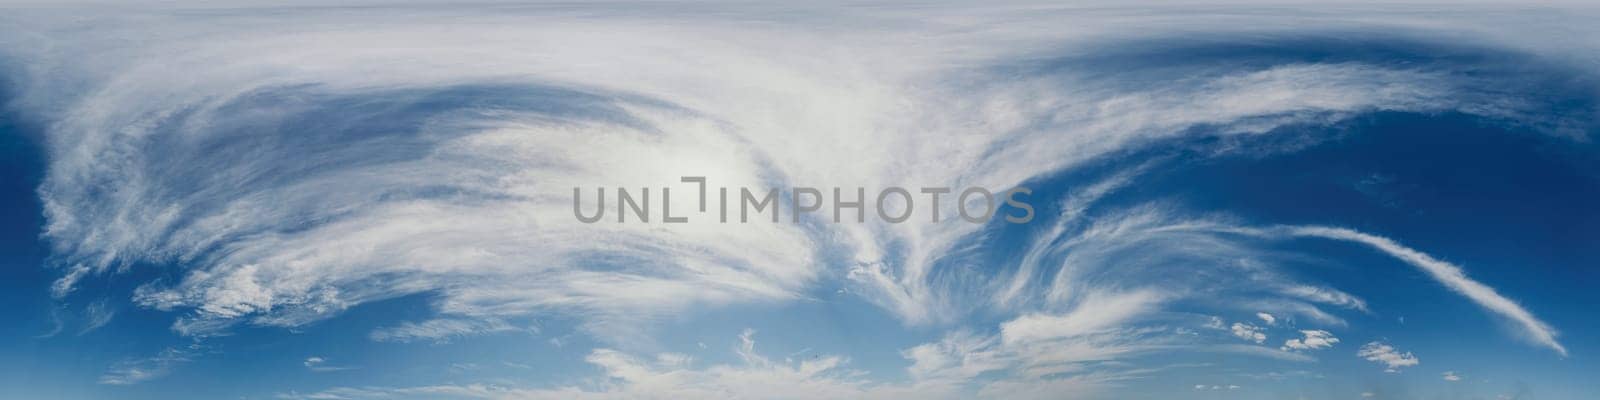 Blue summer 360 panorama of sky with clouds, no ground, in spherical equirectangular format for easy use in 3D graphics and aerial or ground composites, seamless and suitable for sky replacement. by panophotograph